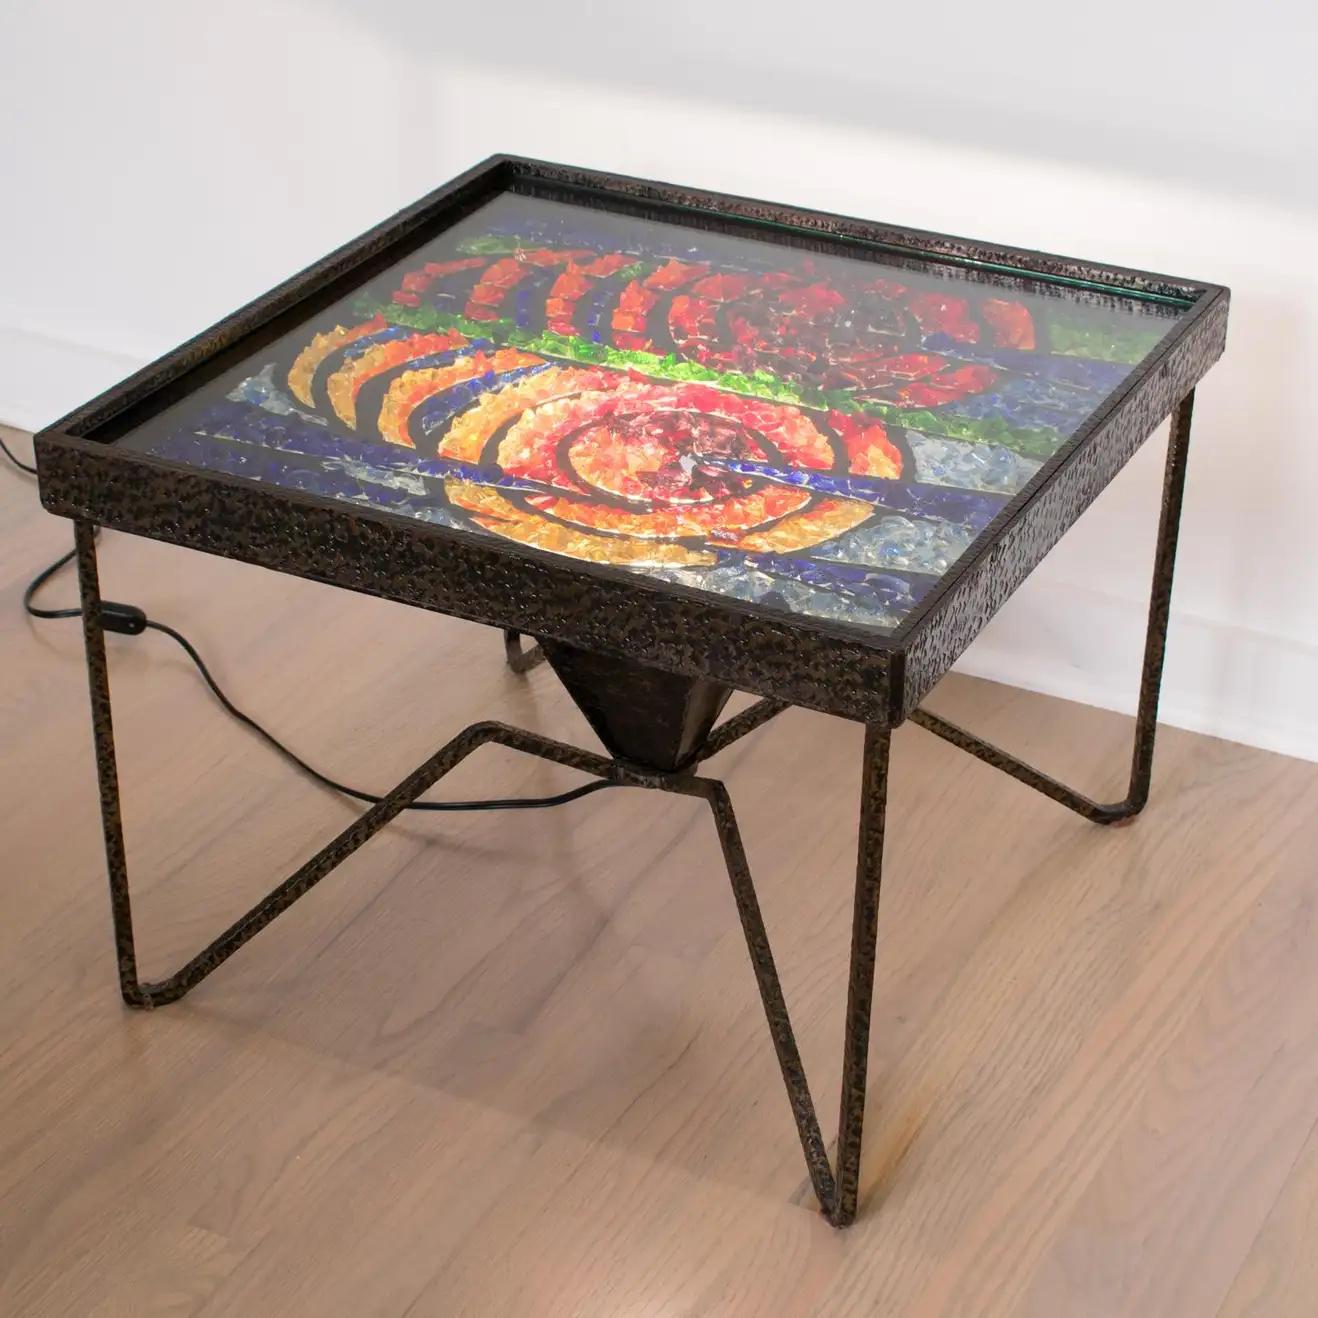 Wrought Iron Side Coffee Table with Glass Mosaic, France 1960s For Sale 1